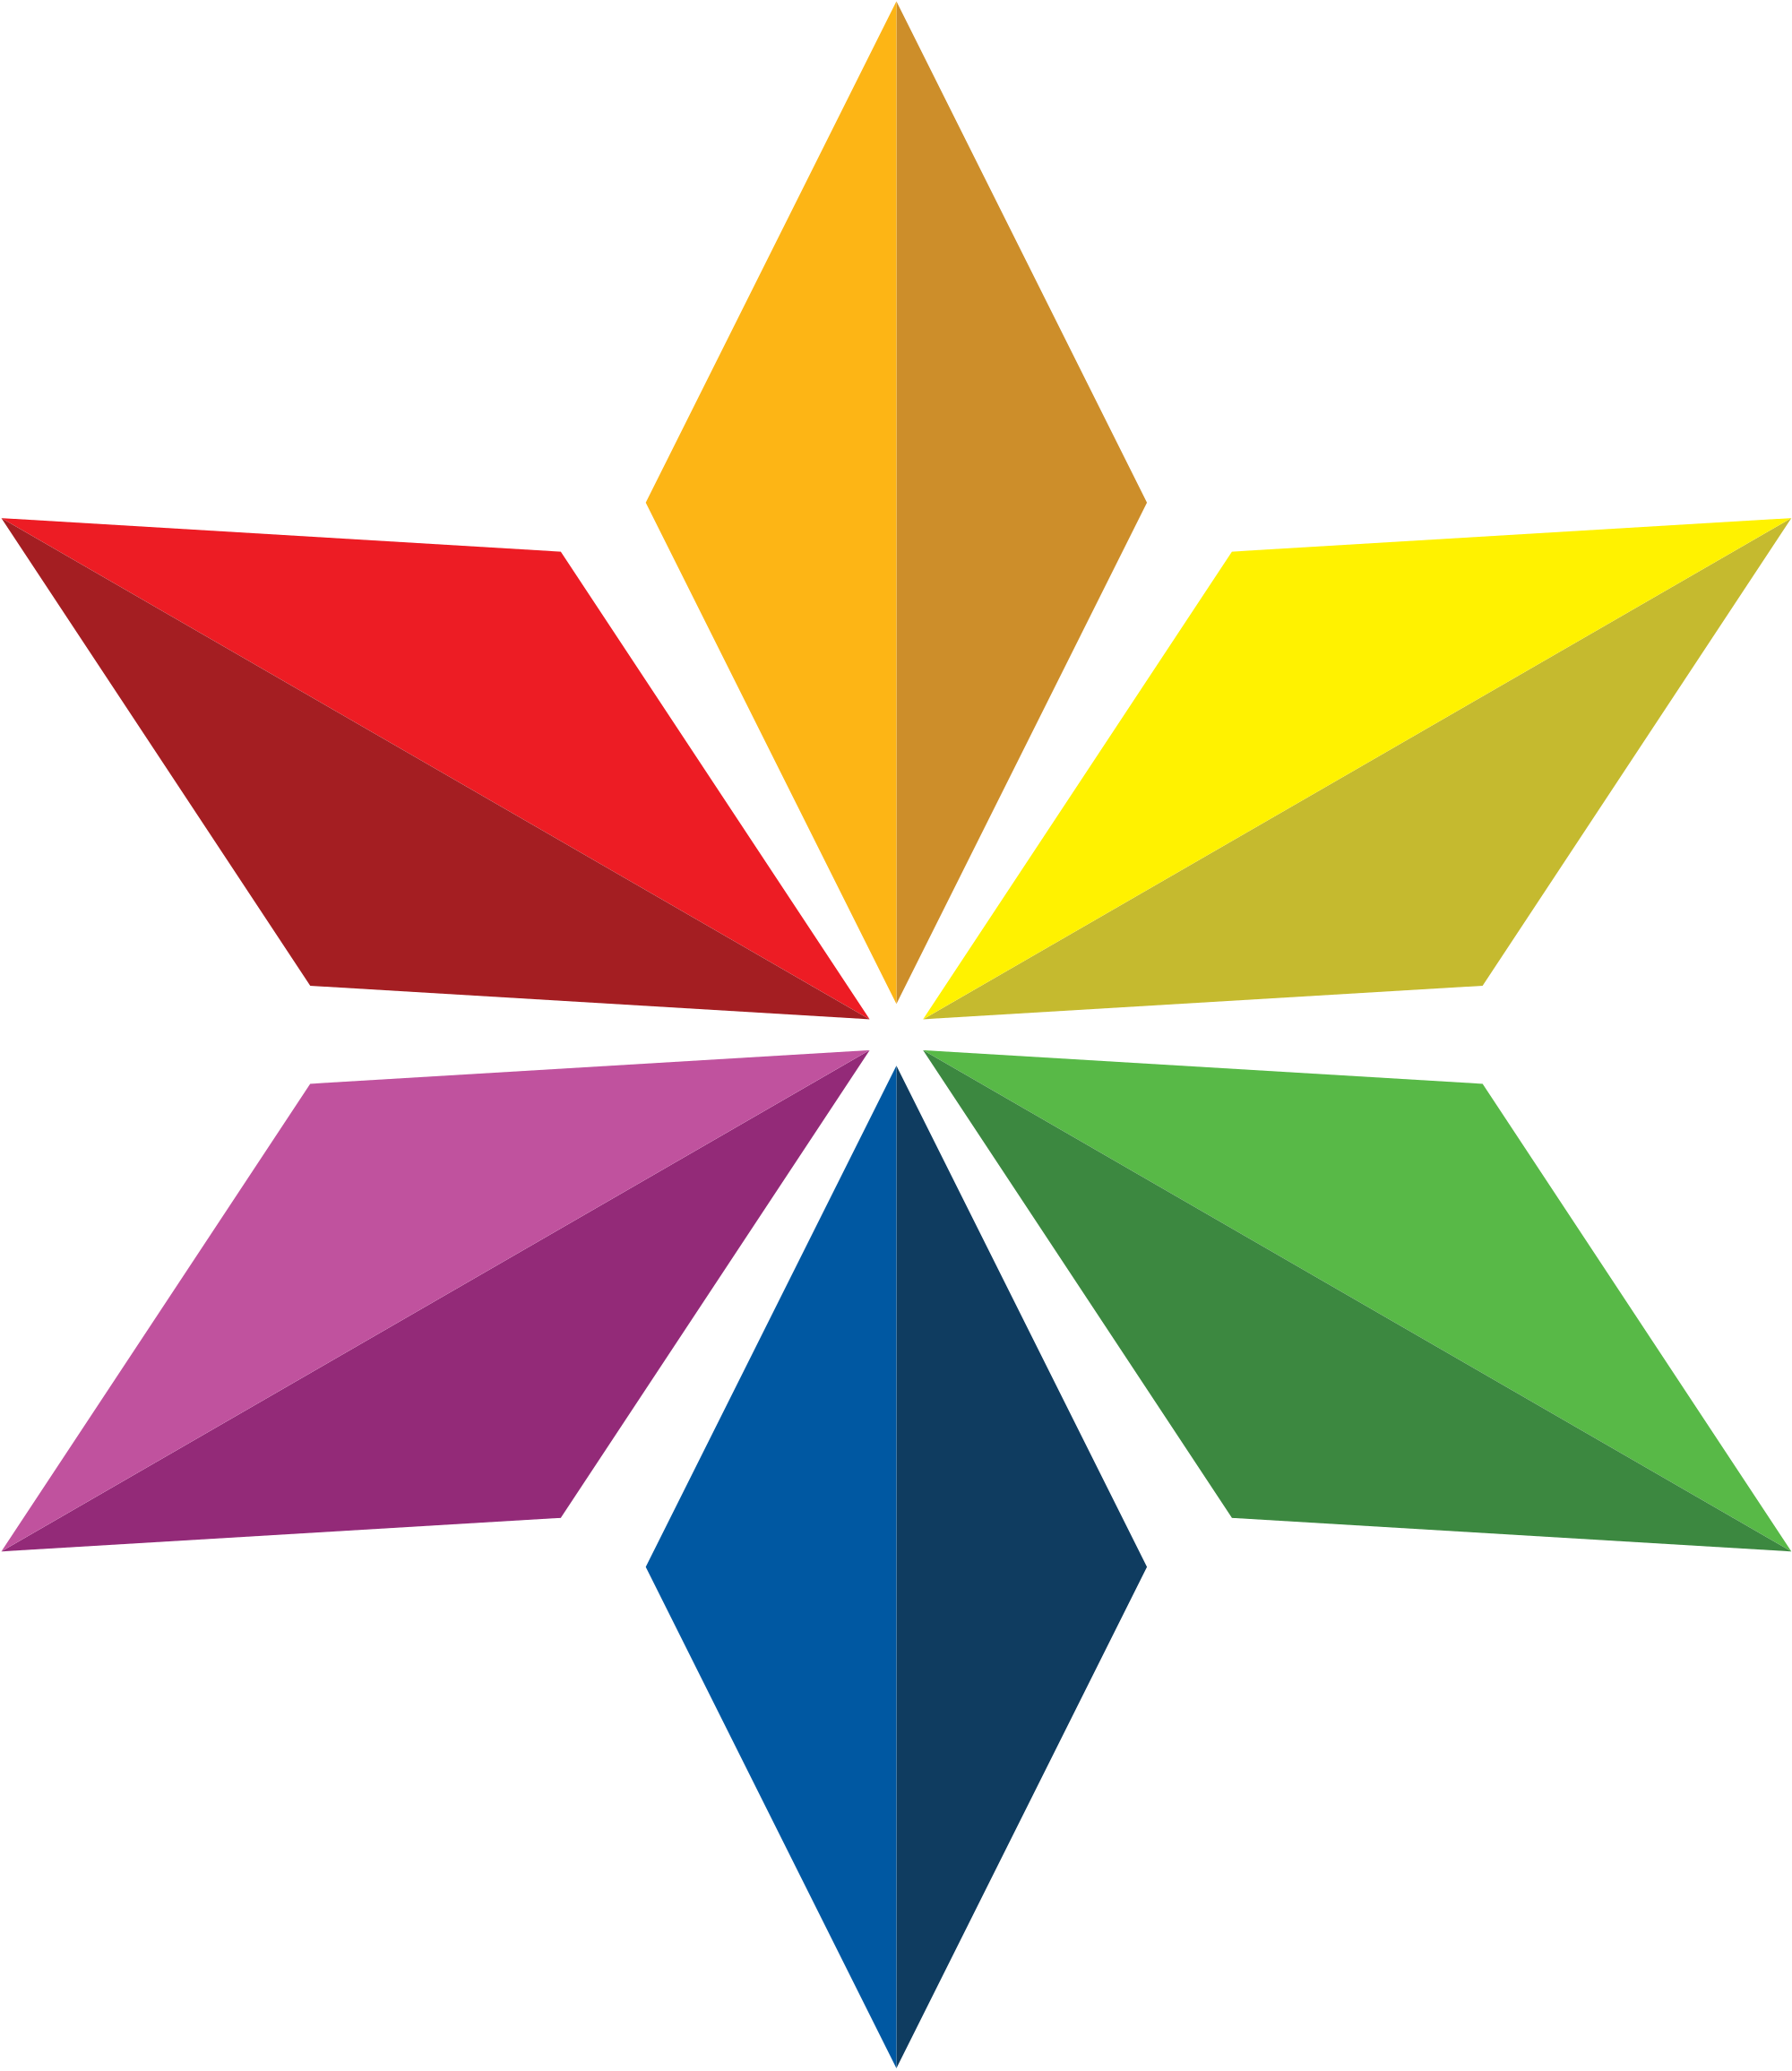 File:Six pointed Diaspora Star in rainbow colors.svg - Wikimedia ...